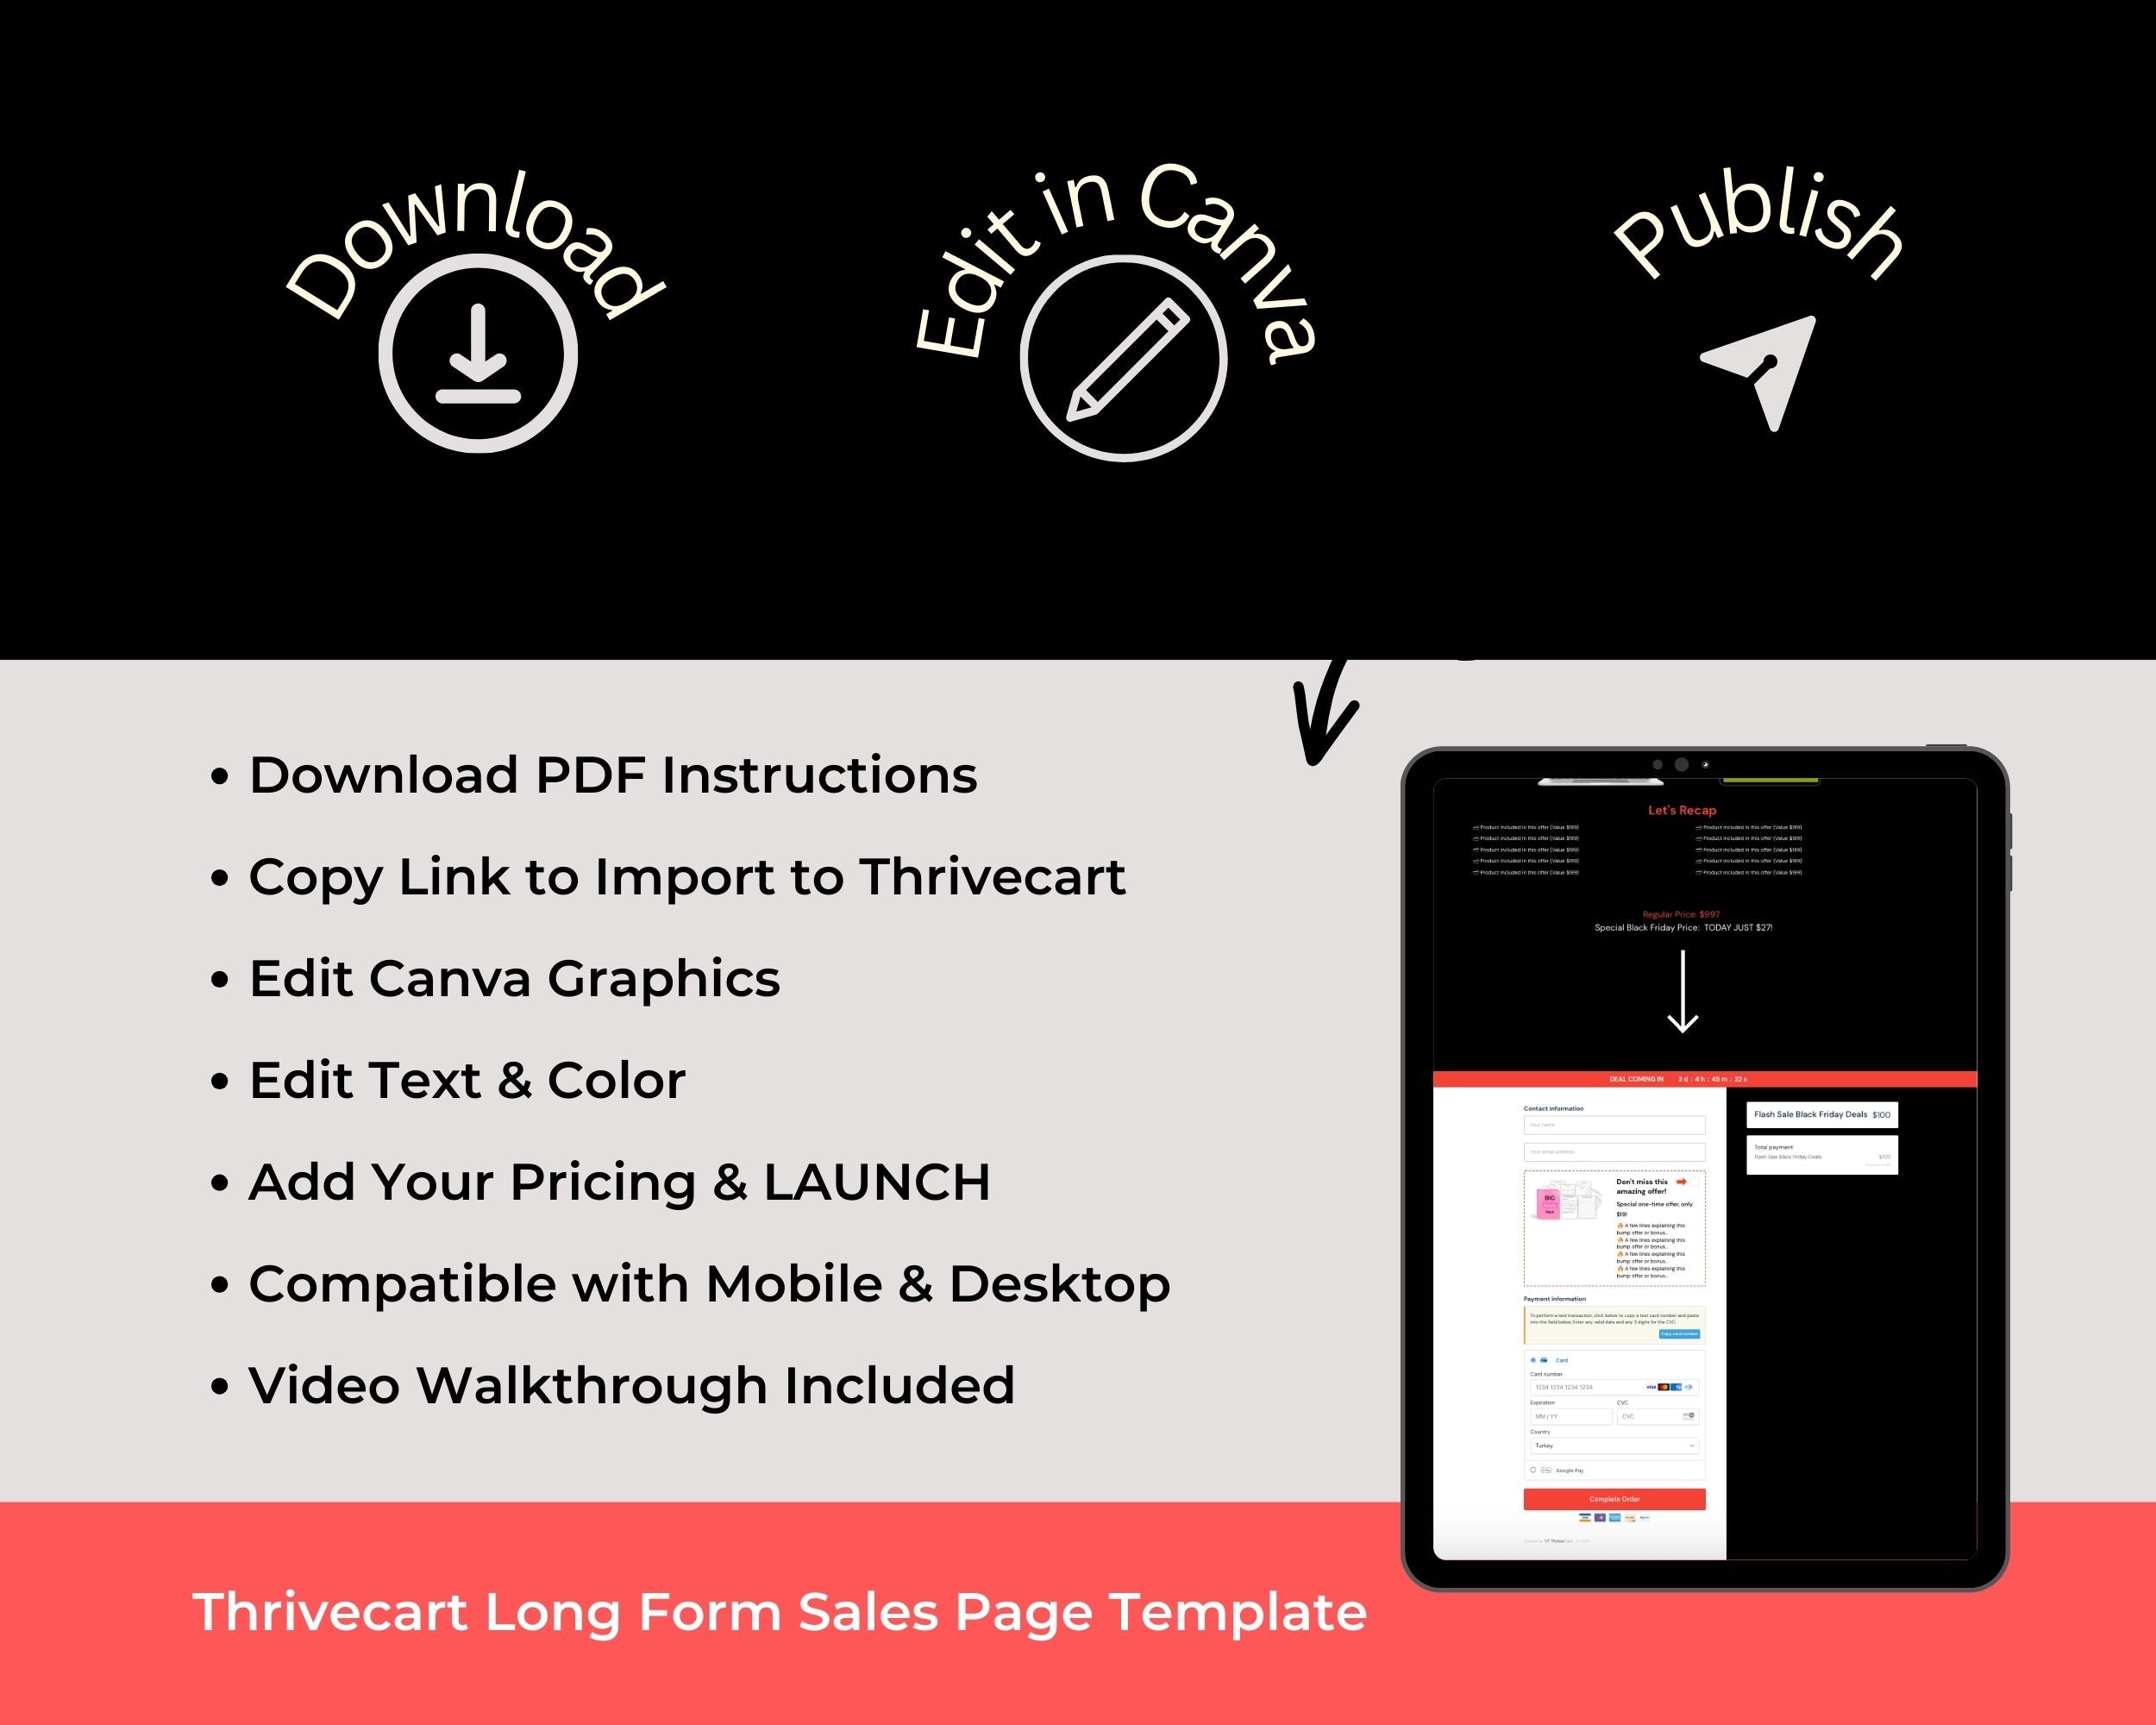 Animated Black Friday Sales Page Template in ThriveCart